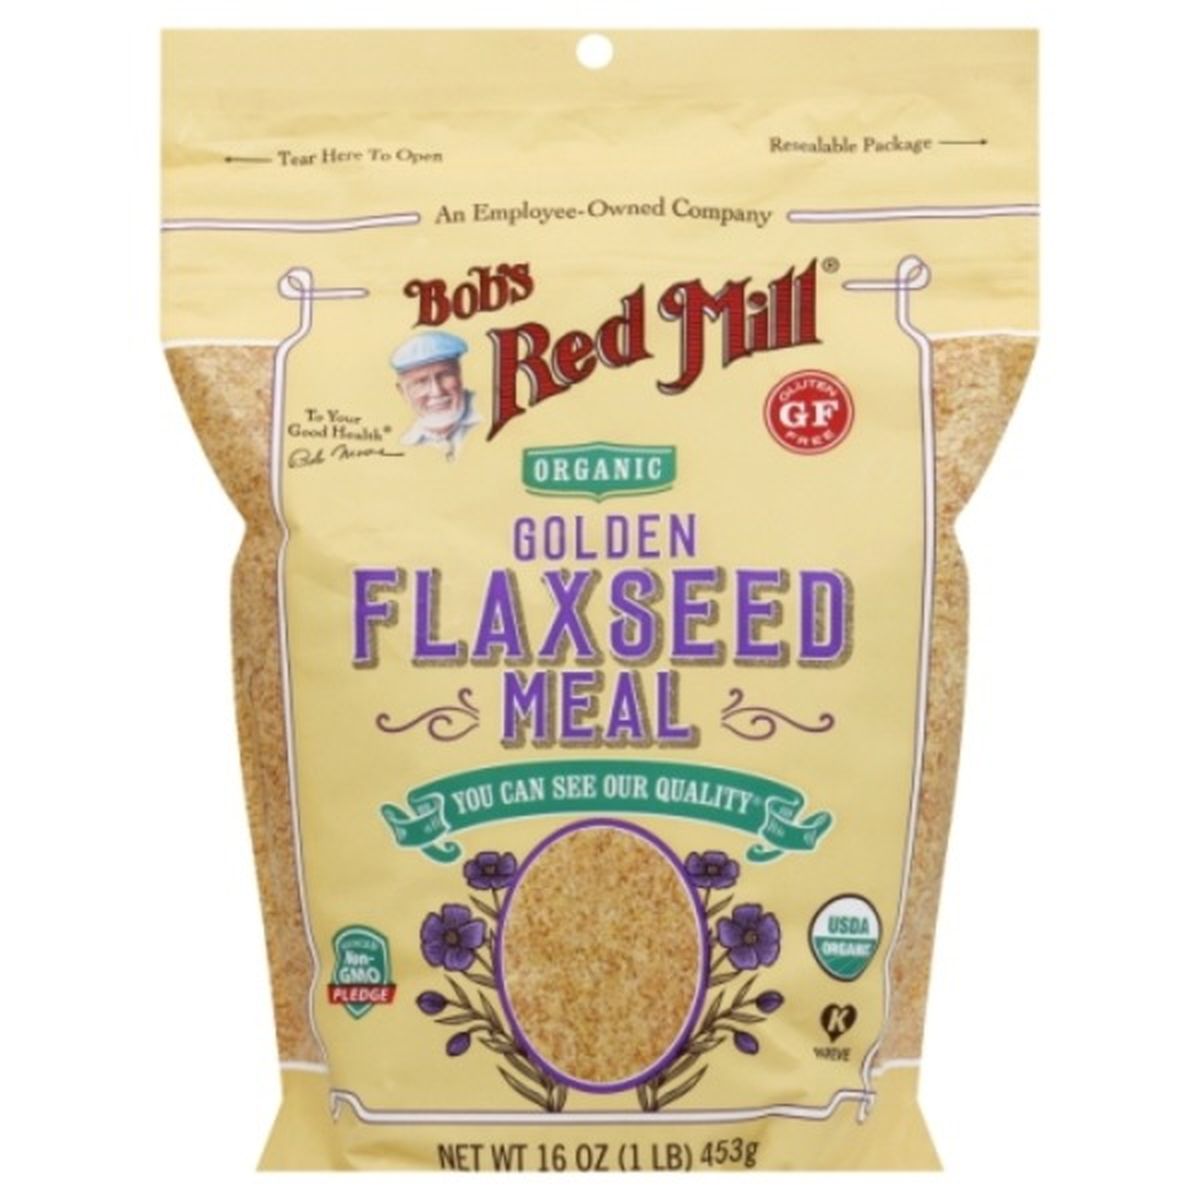 Calories in Bob's Red Mill Flaxseed Meal, Organic, Golden